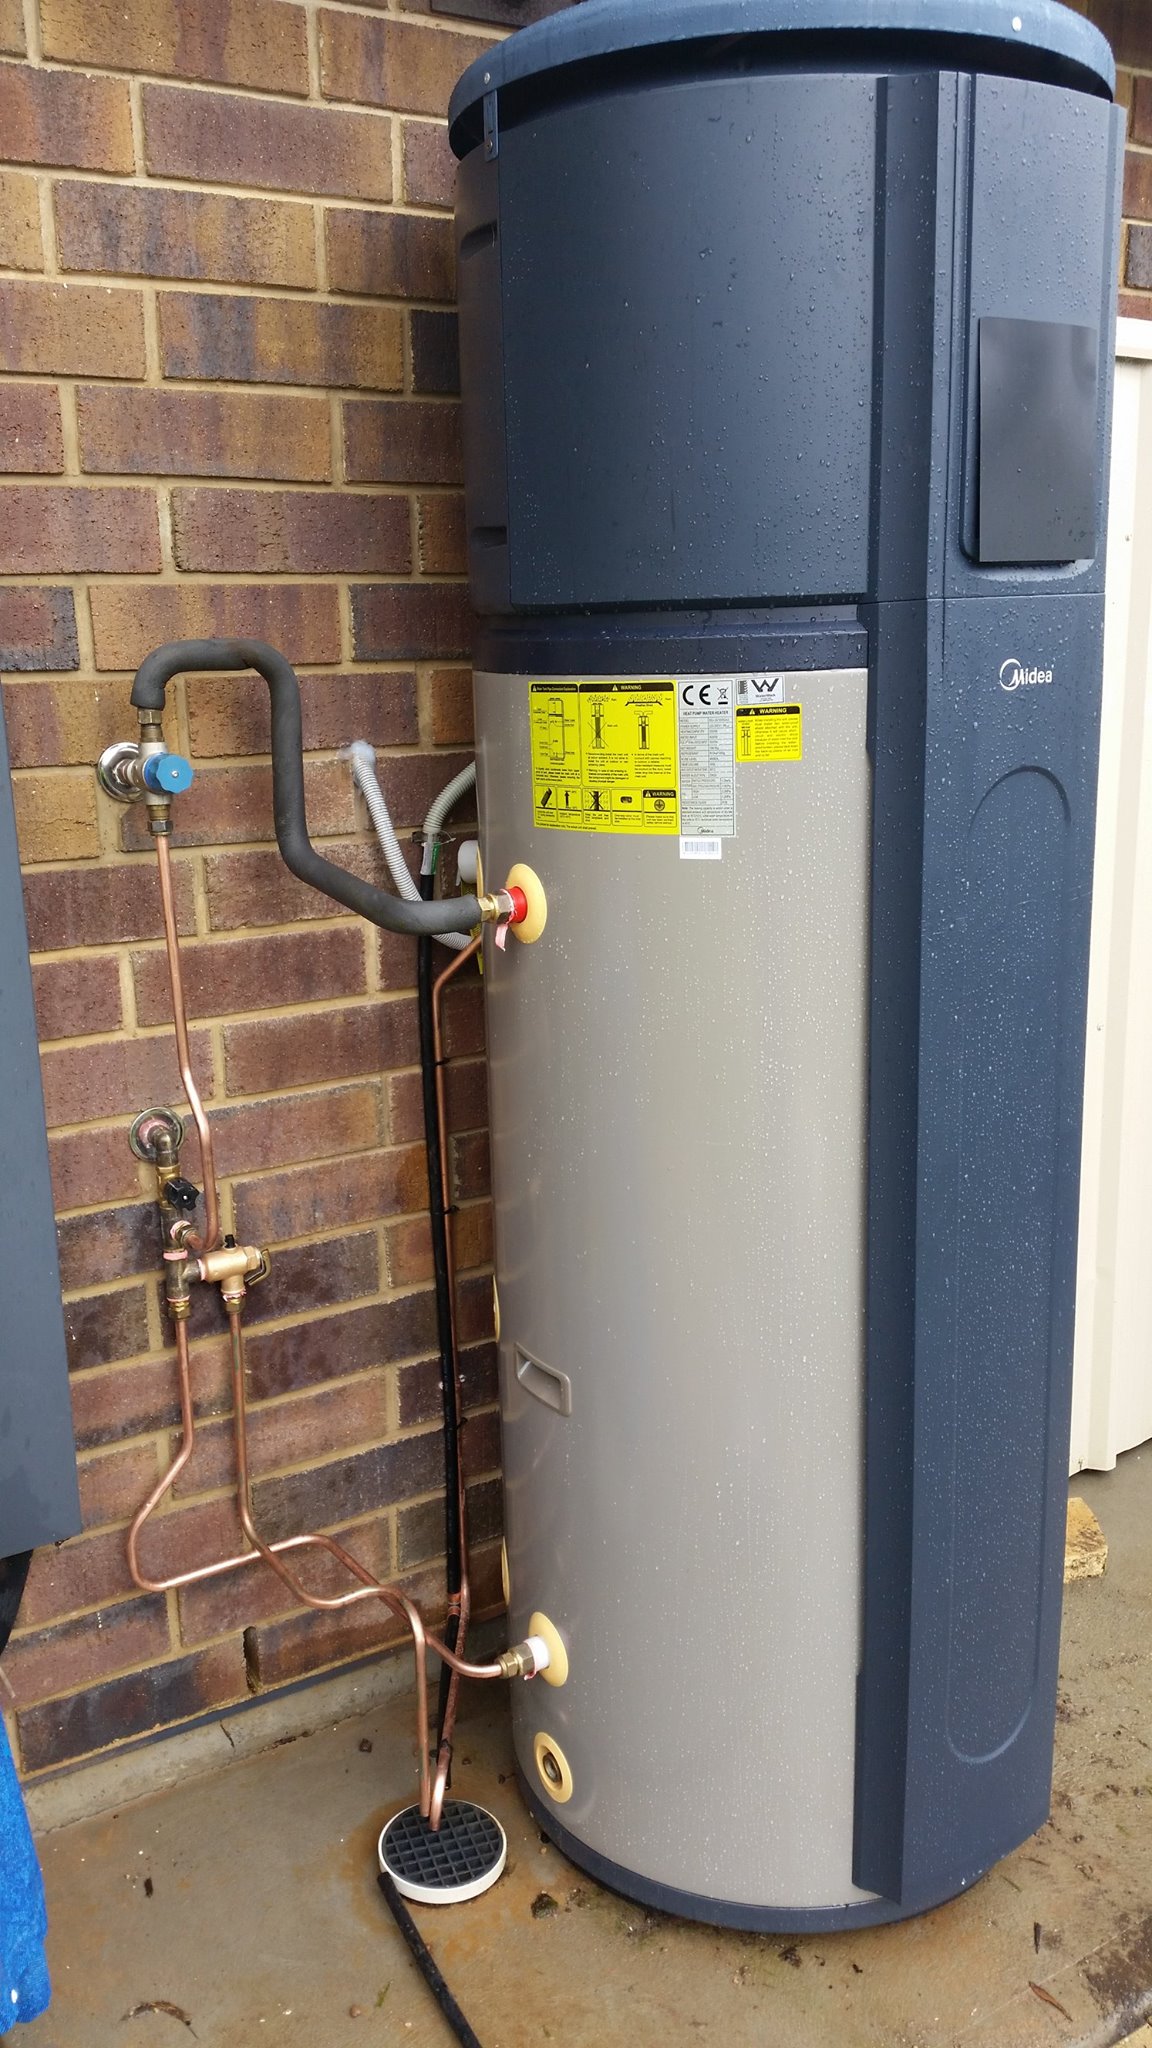 The pros and cons of electric hot water tanks